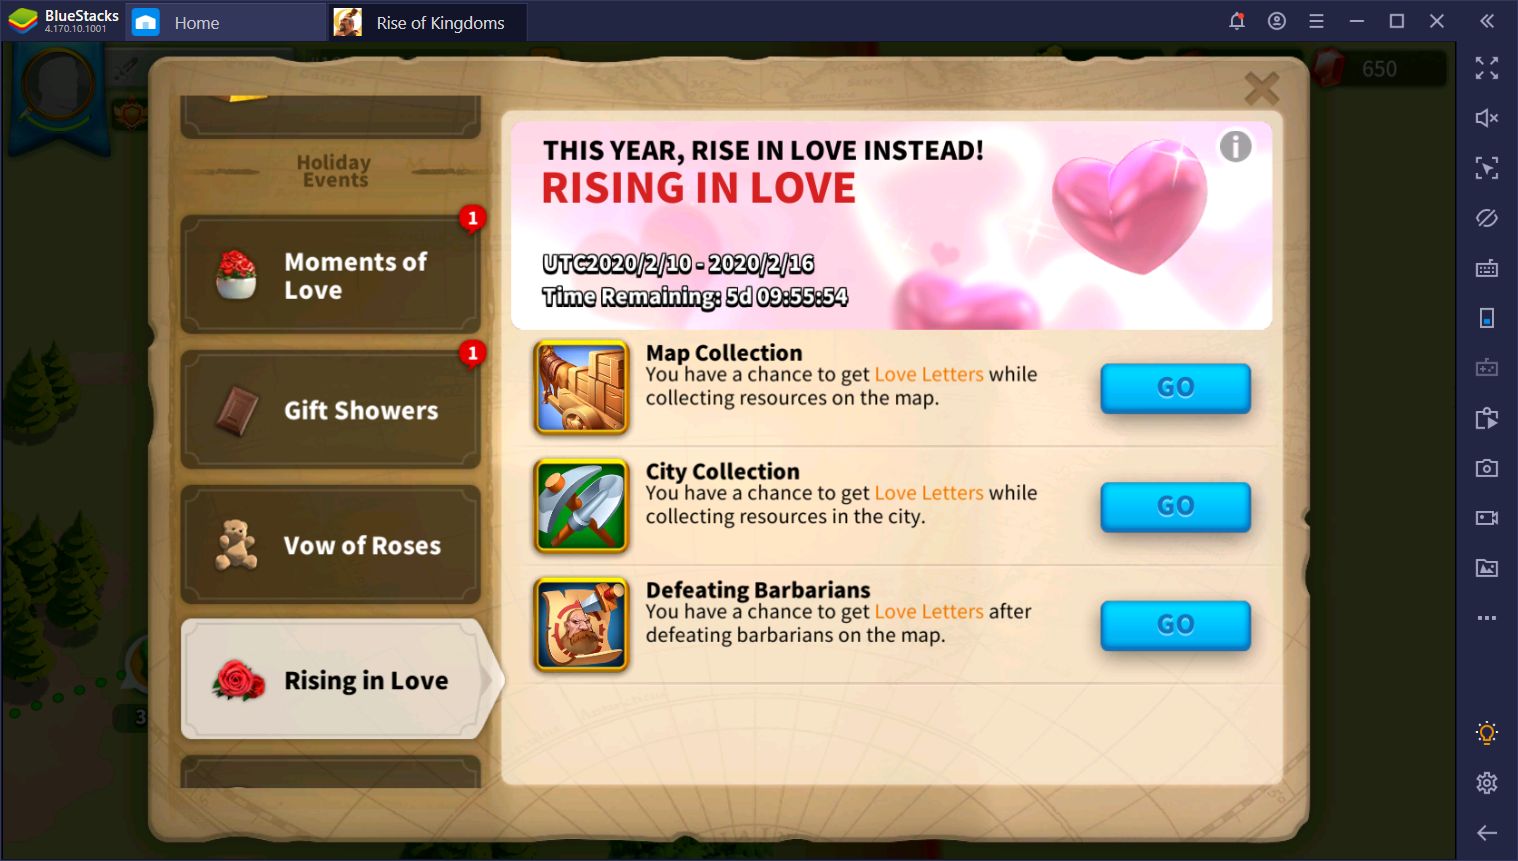 Rise of Kingdoms Sweet Valentine’s Update - All You Need to Know About the New Patch